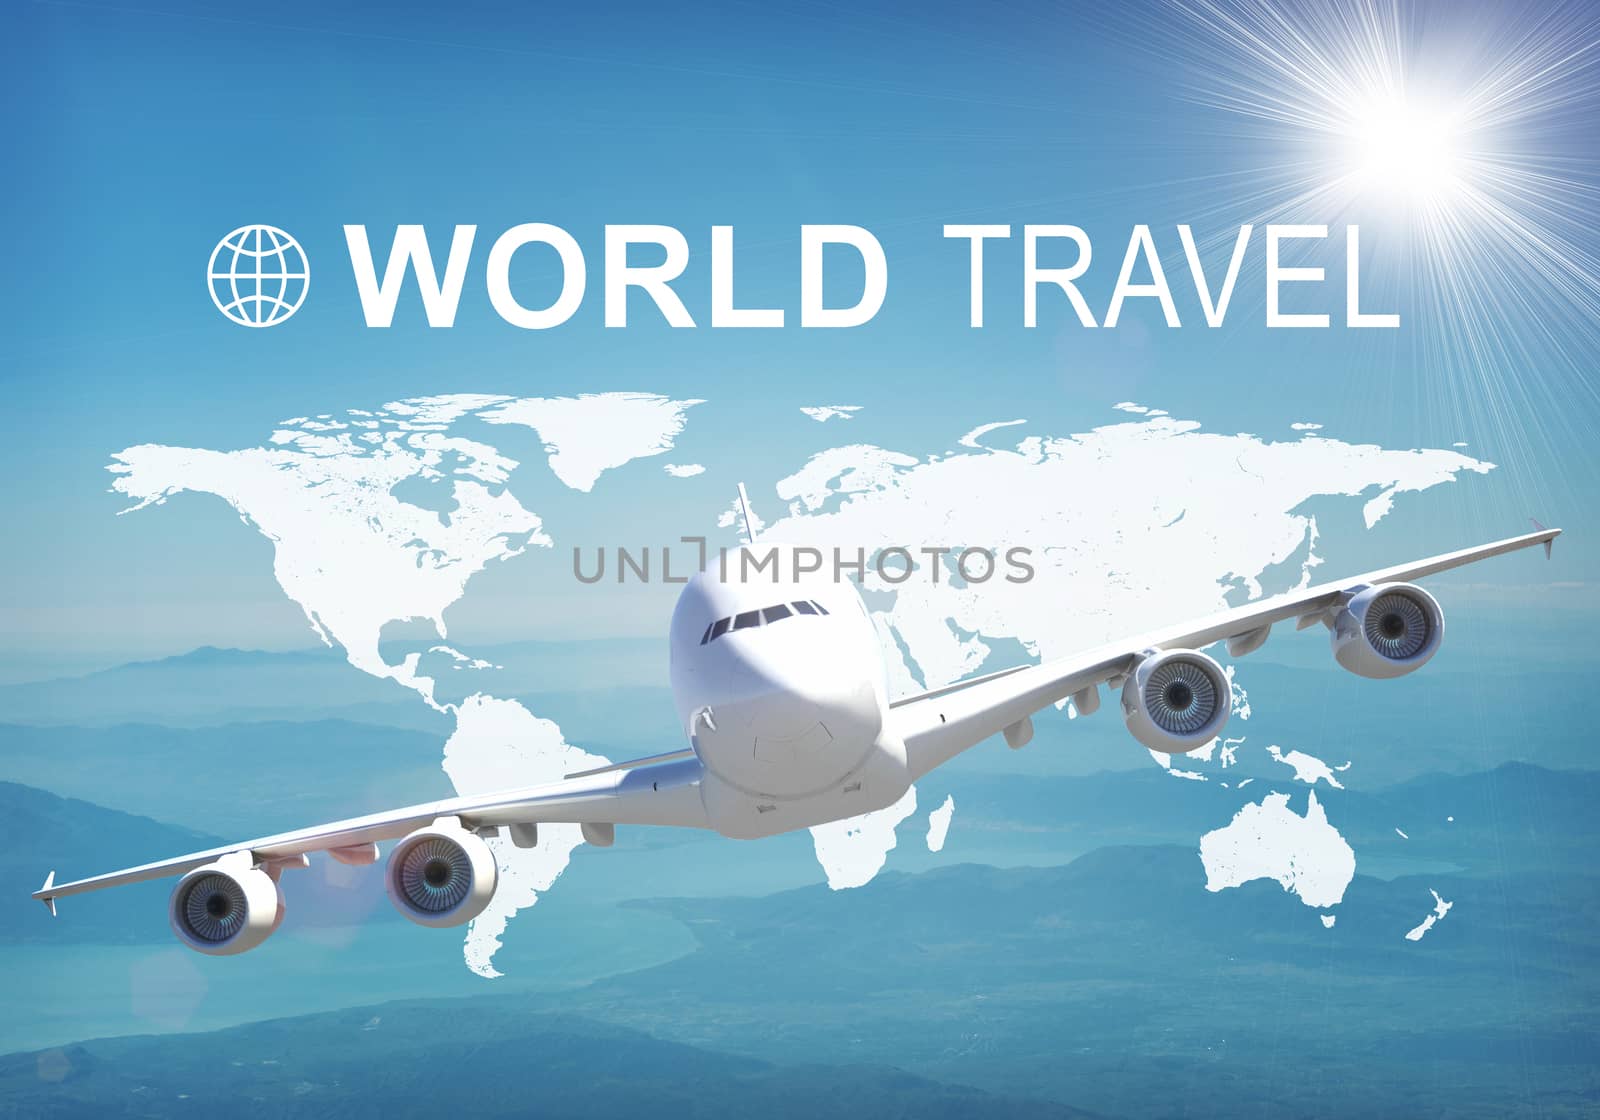 Contoured map of world continents with inscription World Travel and related symbol. Flying jet on foreground, Earth surface, sky and sun an blue sky as backdrop.